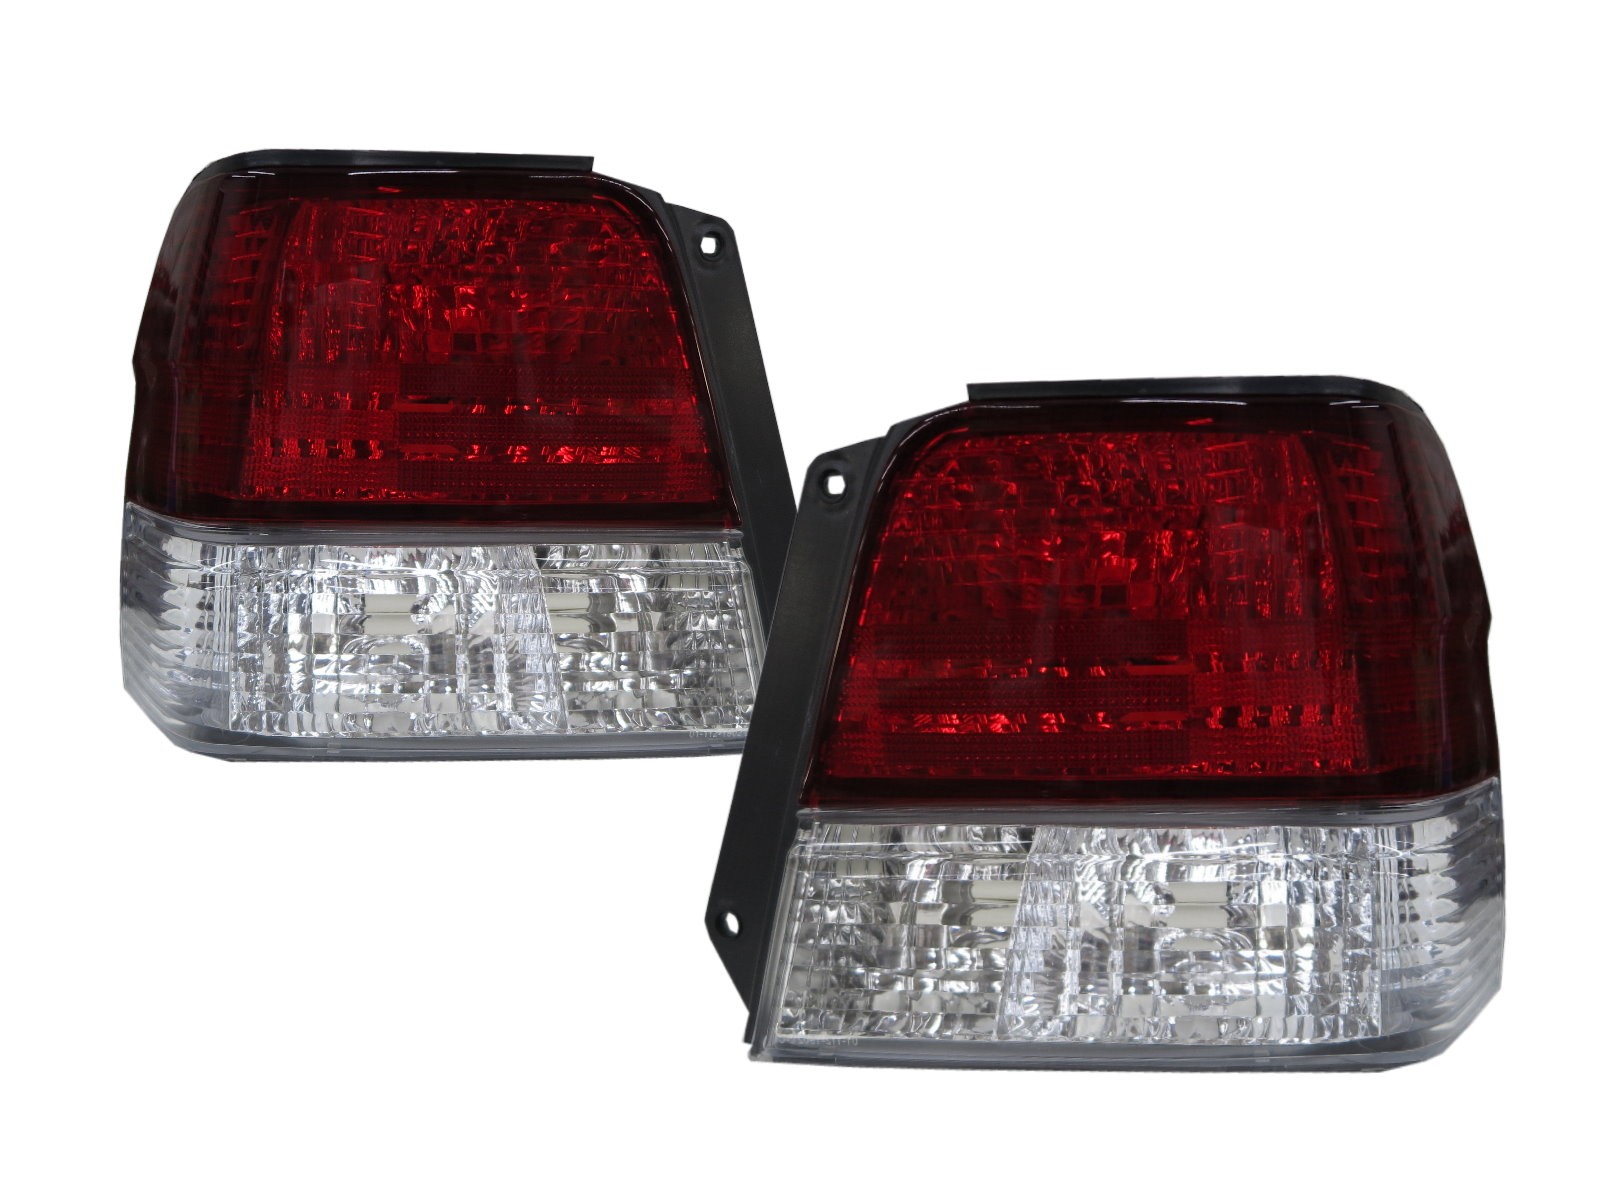 CrazyTheGod TERCEL L50 Fifth generation 1995-2002 Sedan 4D Clear Tail Rear Light Red/White Taiwan for TOYOTA